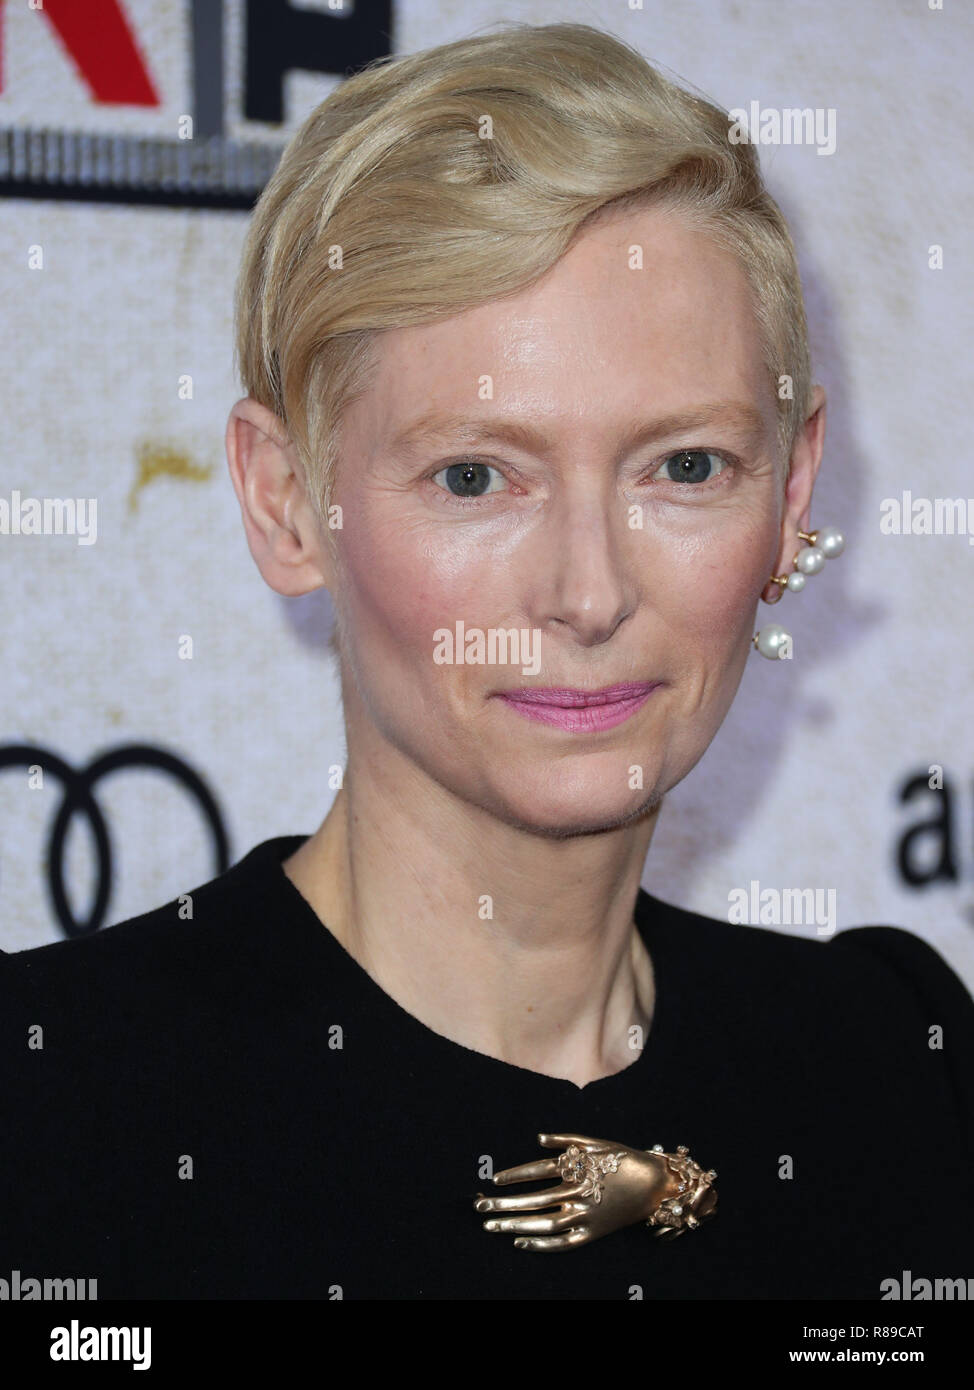 HOLLYWOOD, LOS ANGELES, CA, USA - OCTOBER 24: Actress Tilda Swinton wearing a Schiaparelli Haute Couture outfit arrives at the Los Angeles Premiere Of Amazon Studio's 'Suspiria' held at the ArcLight Cinerama Dome on October 24, 2018 in Hollywood, Los Angeles, California, United States. (Photo by Xavier Collin/Image Press Agency) Stock Photo